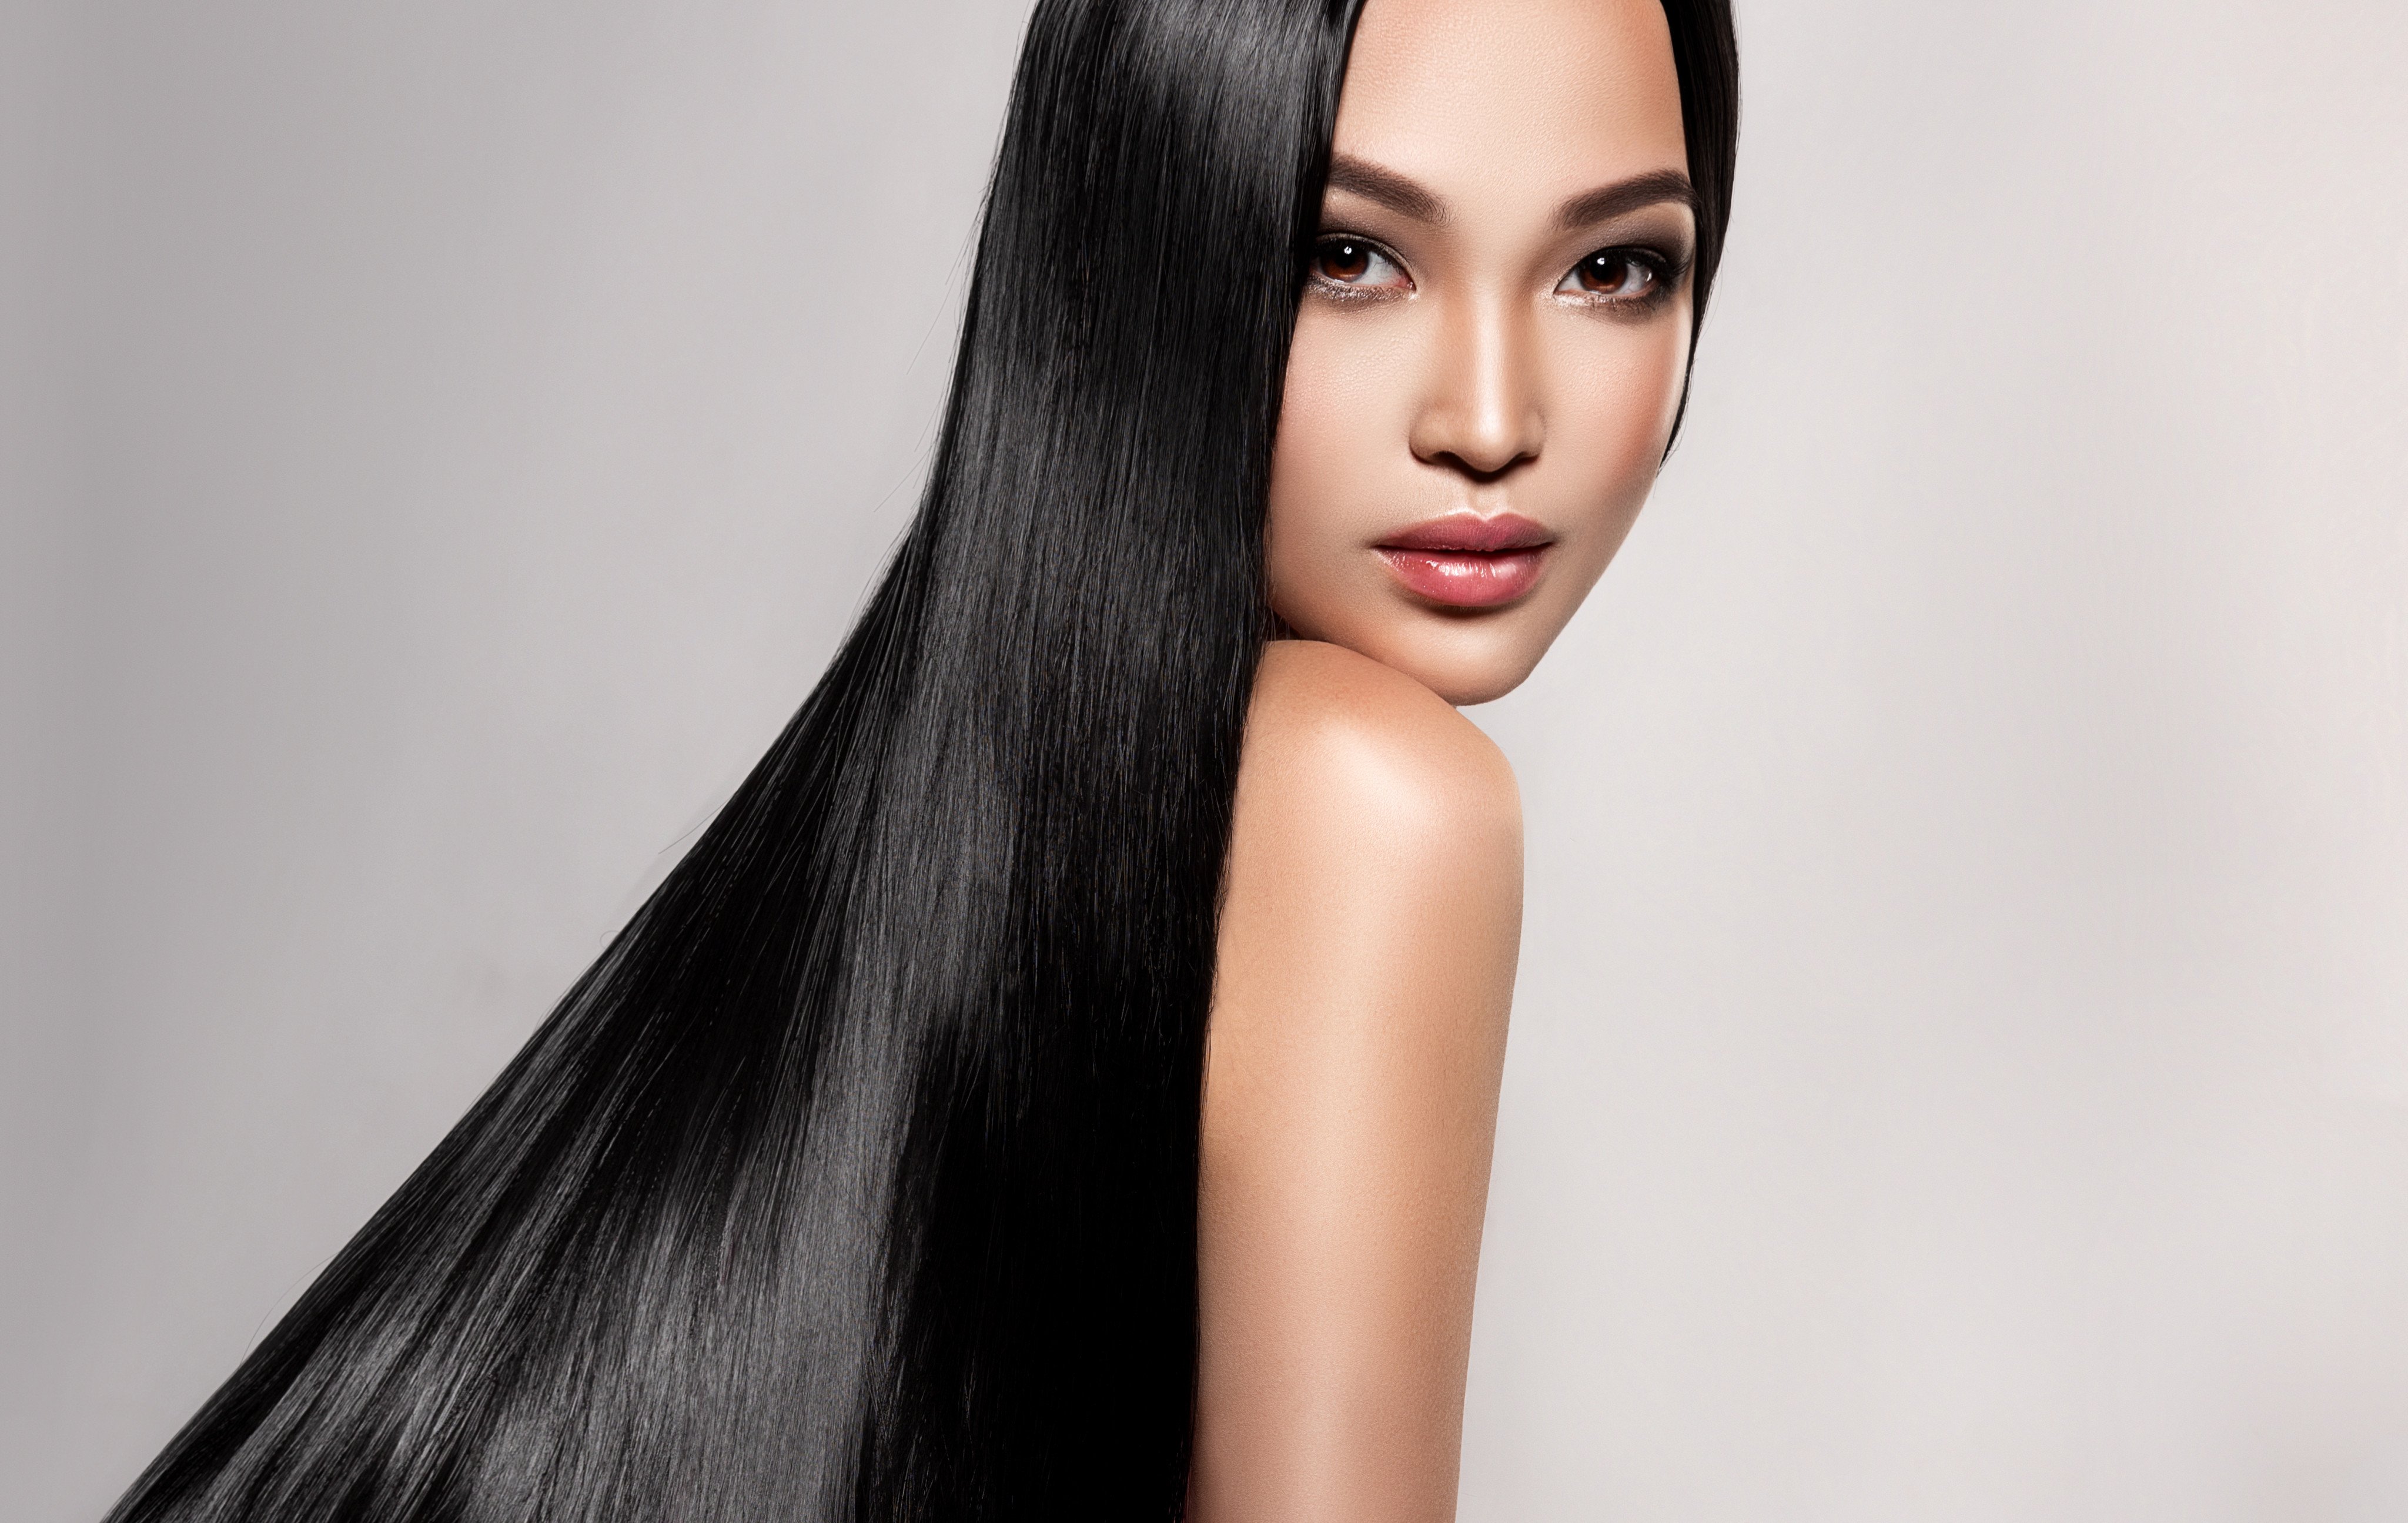 A model with shiny, healthy hair. Personalised shampoos and conditioners promise to bring out the very best in a person’s hair. Is this the future of hair care, or is it just a passing trend? Photo: Shutterstock